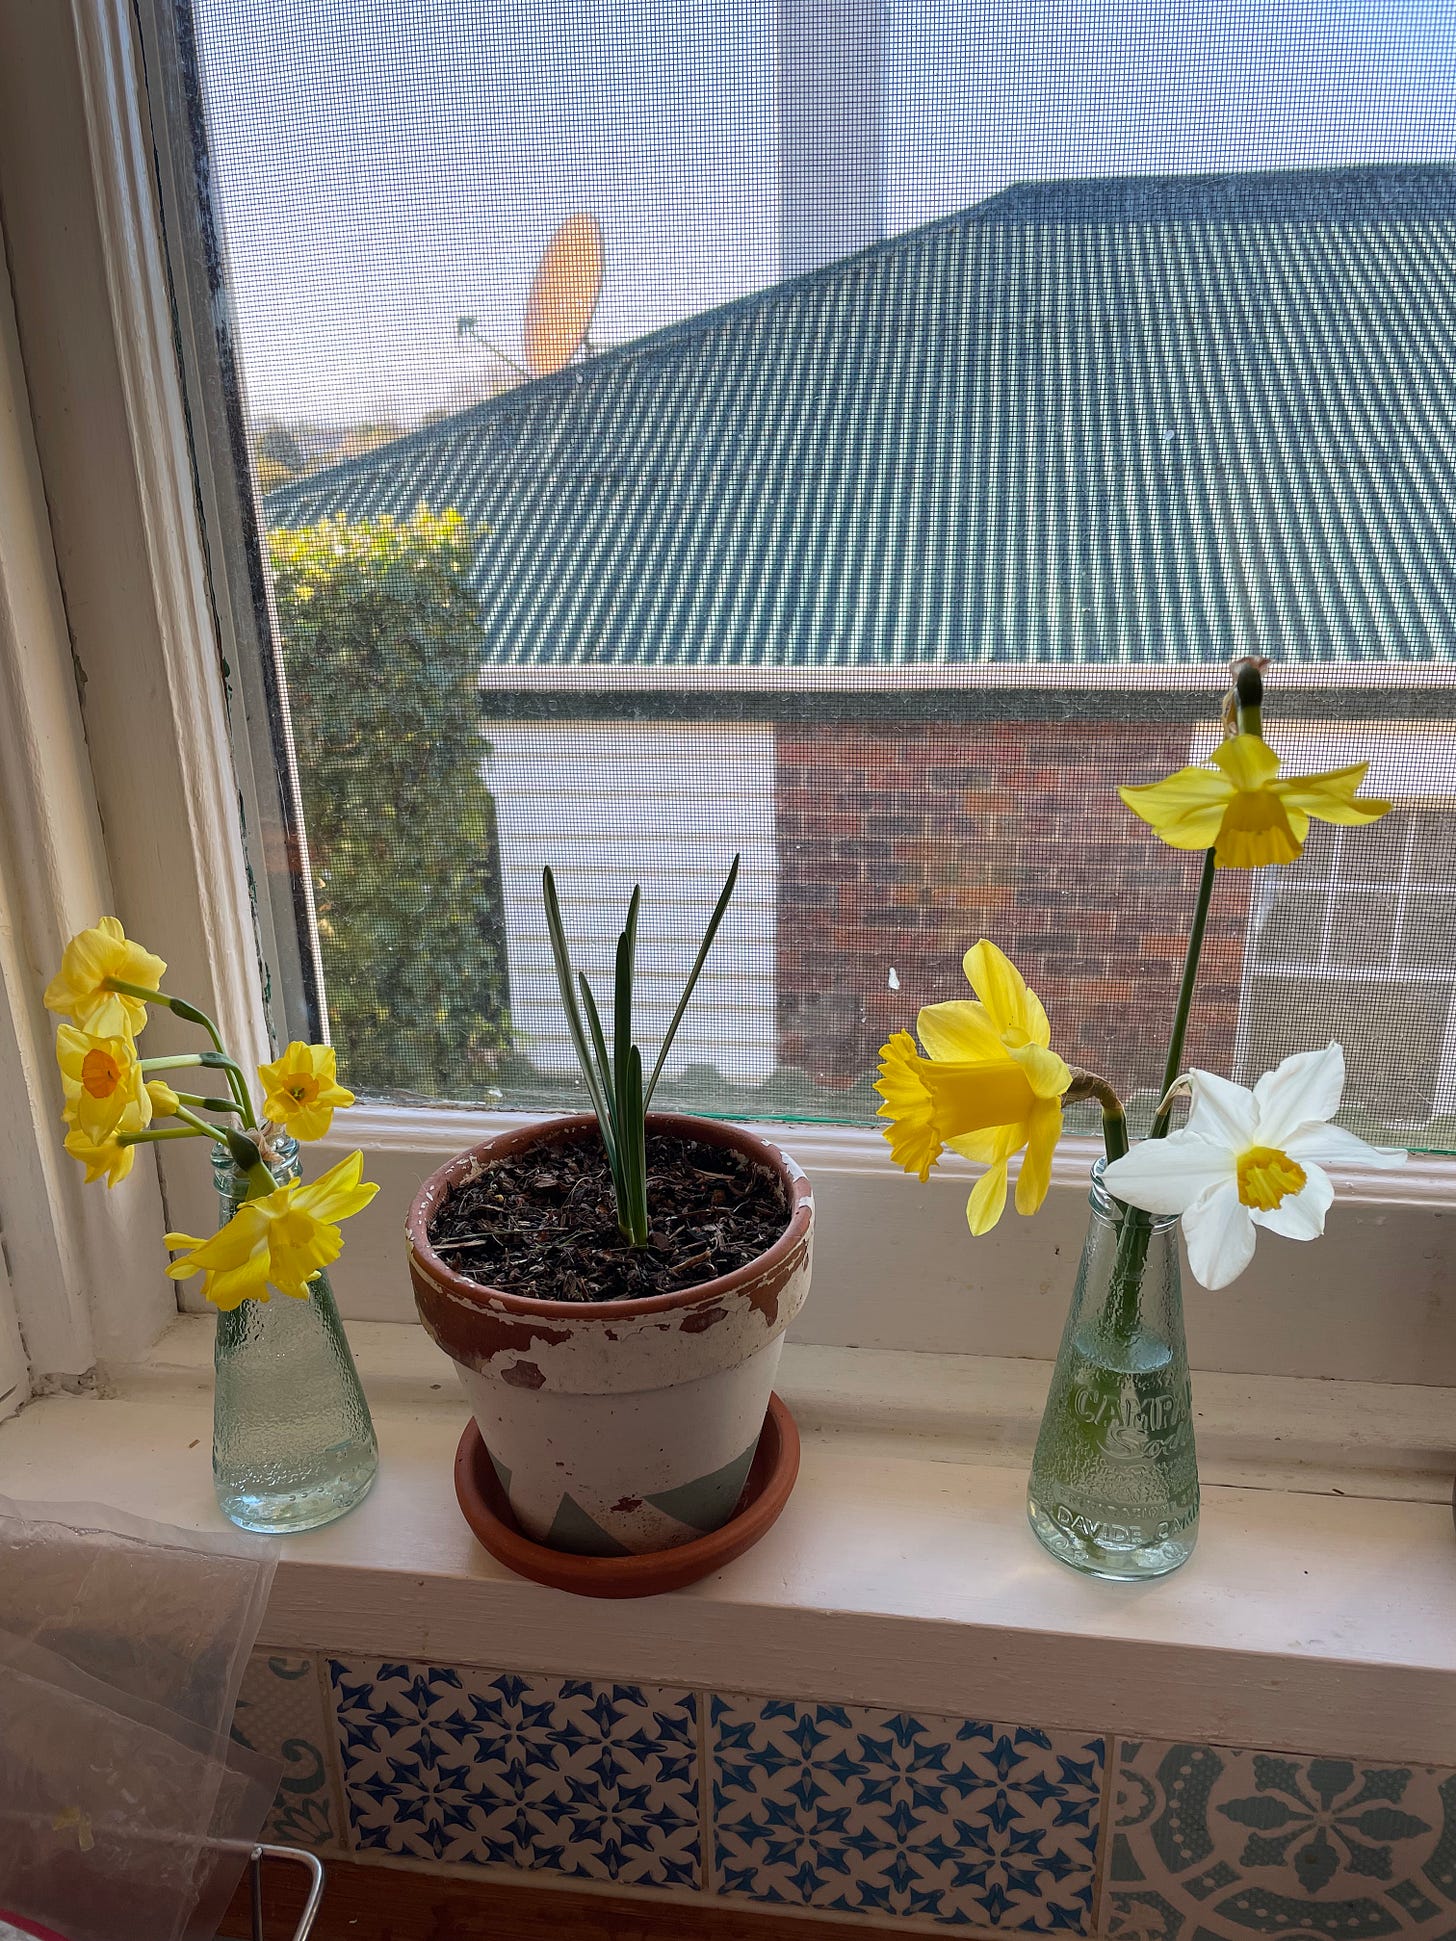 Two small vases of homegrown daffodils on a kitchen window sill alongside a small potted daffodil still yet to flower. A happy spring scene.